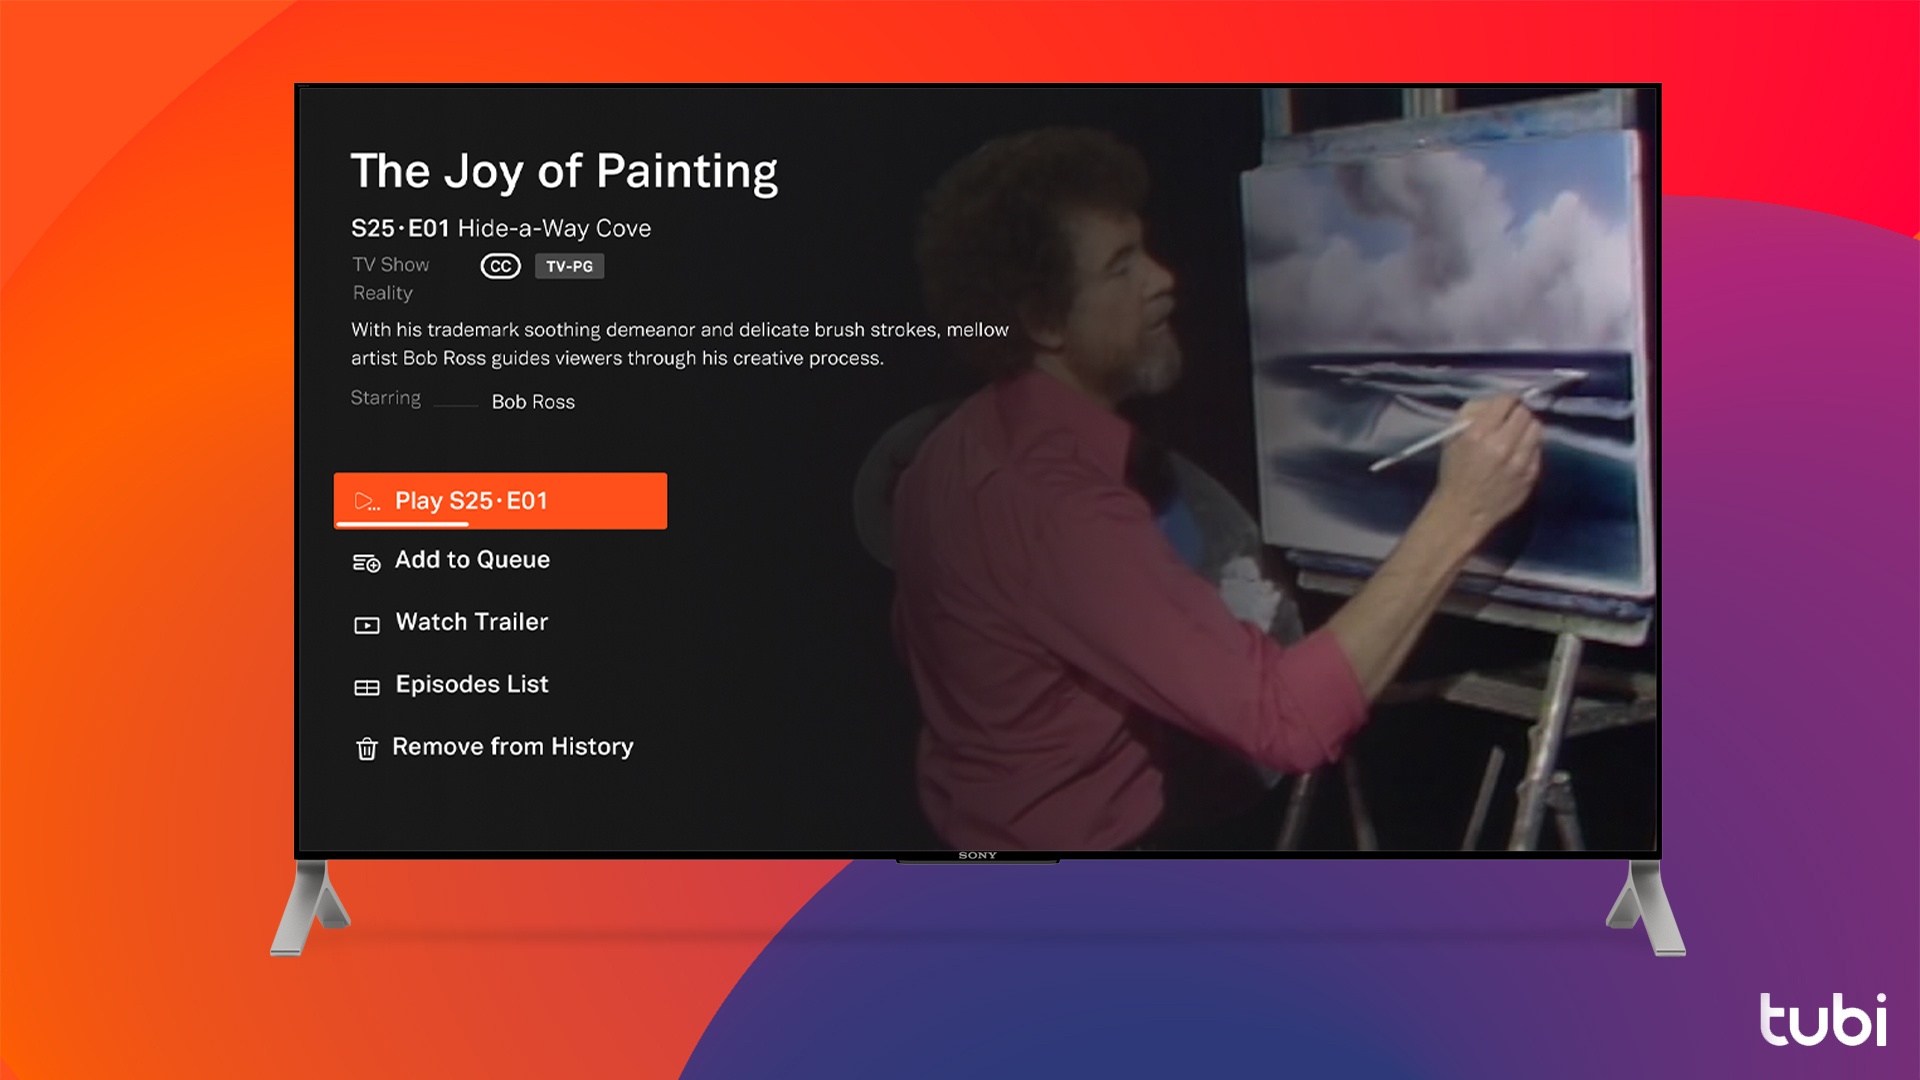 Tubi Adds Bob Ross Content to Its Collection